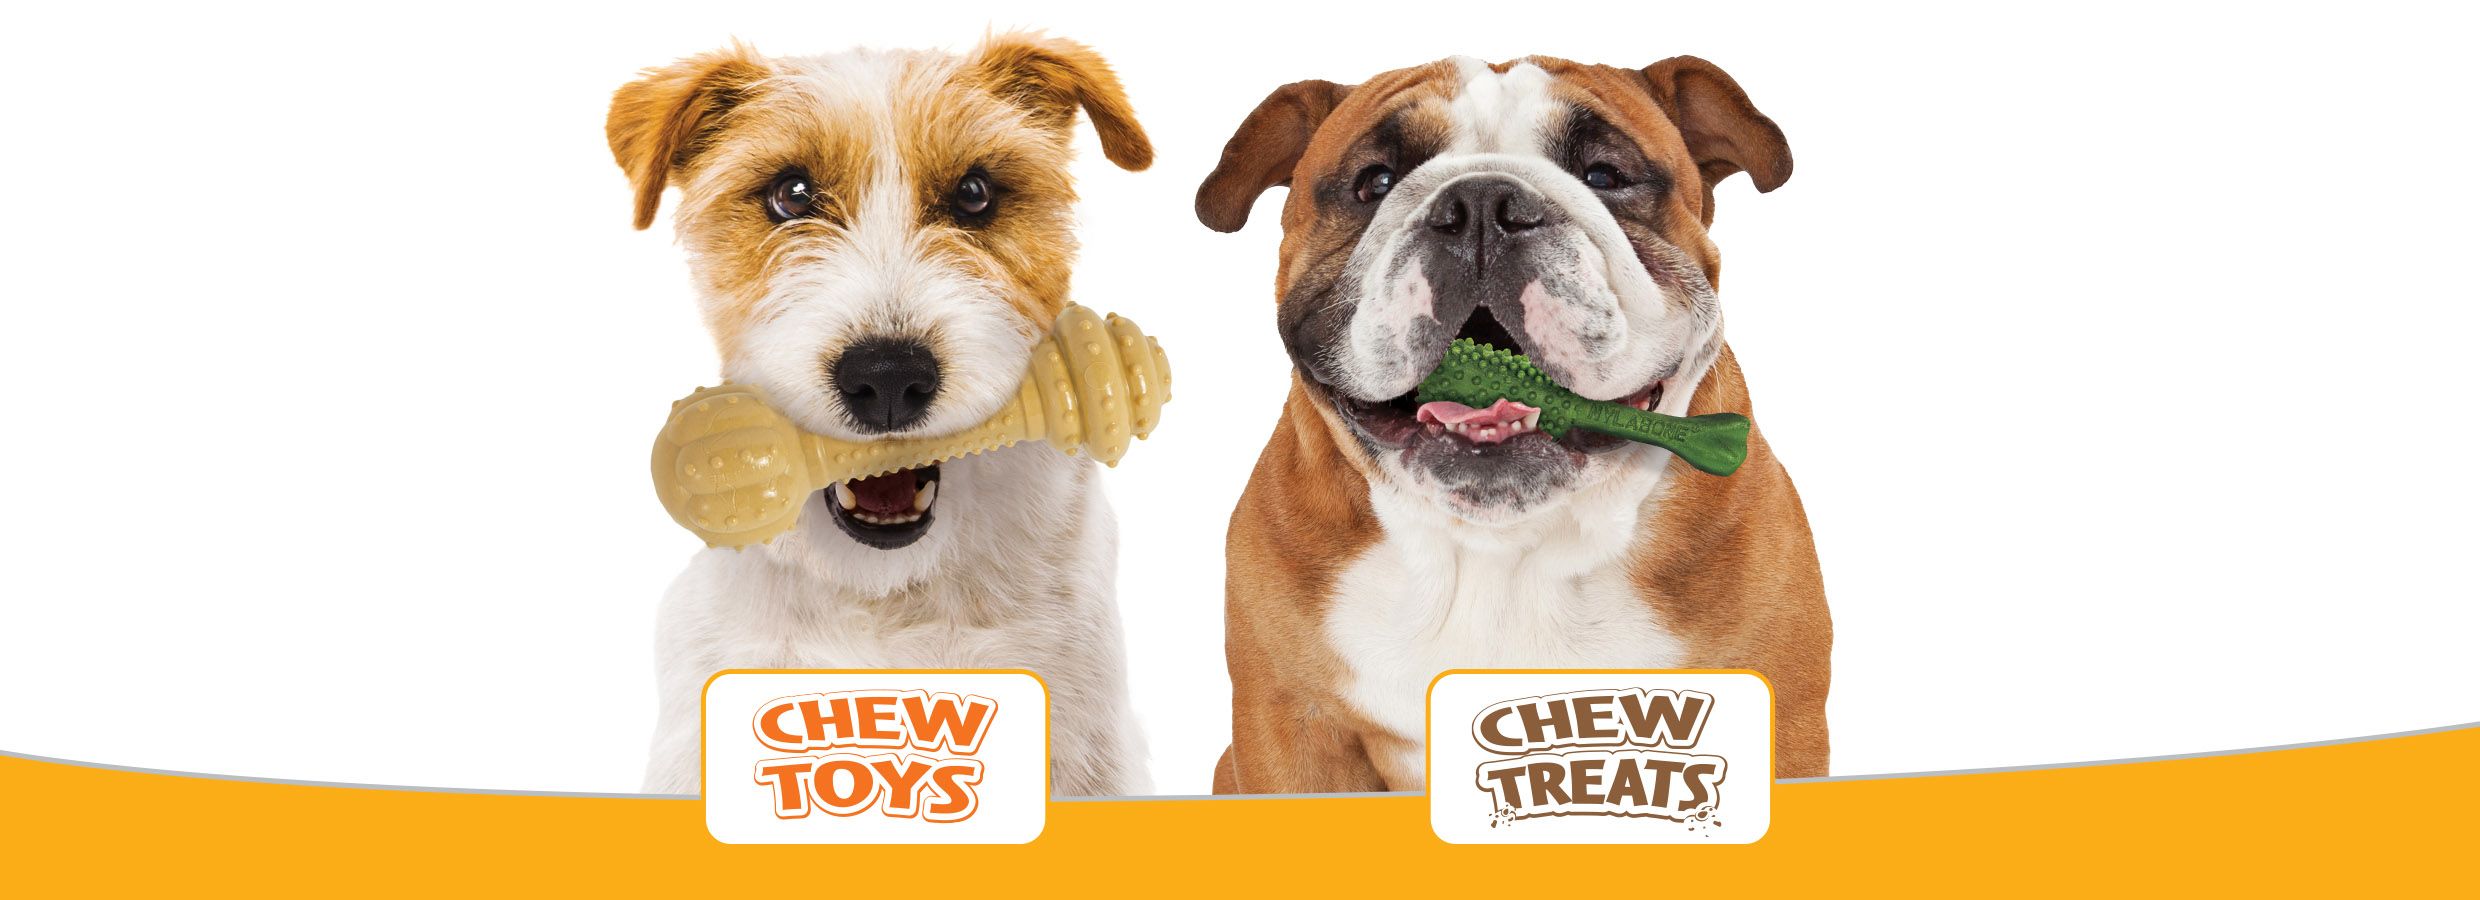 good chew treats for dogs